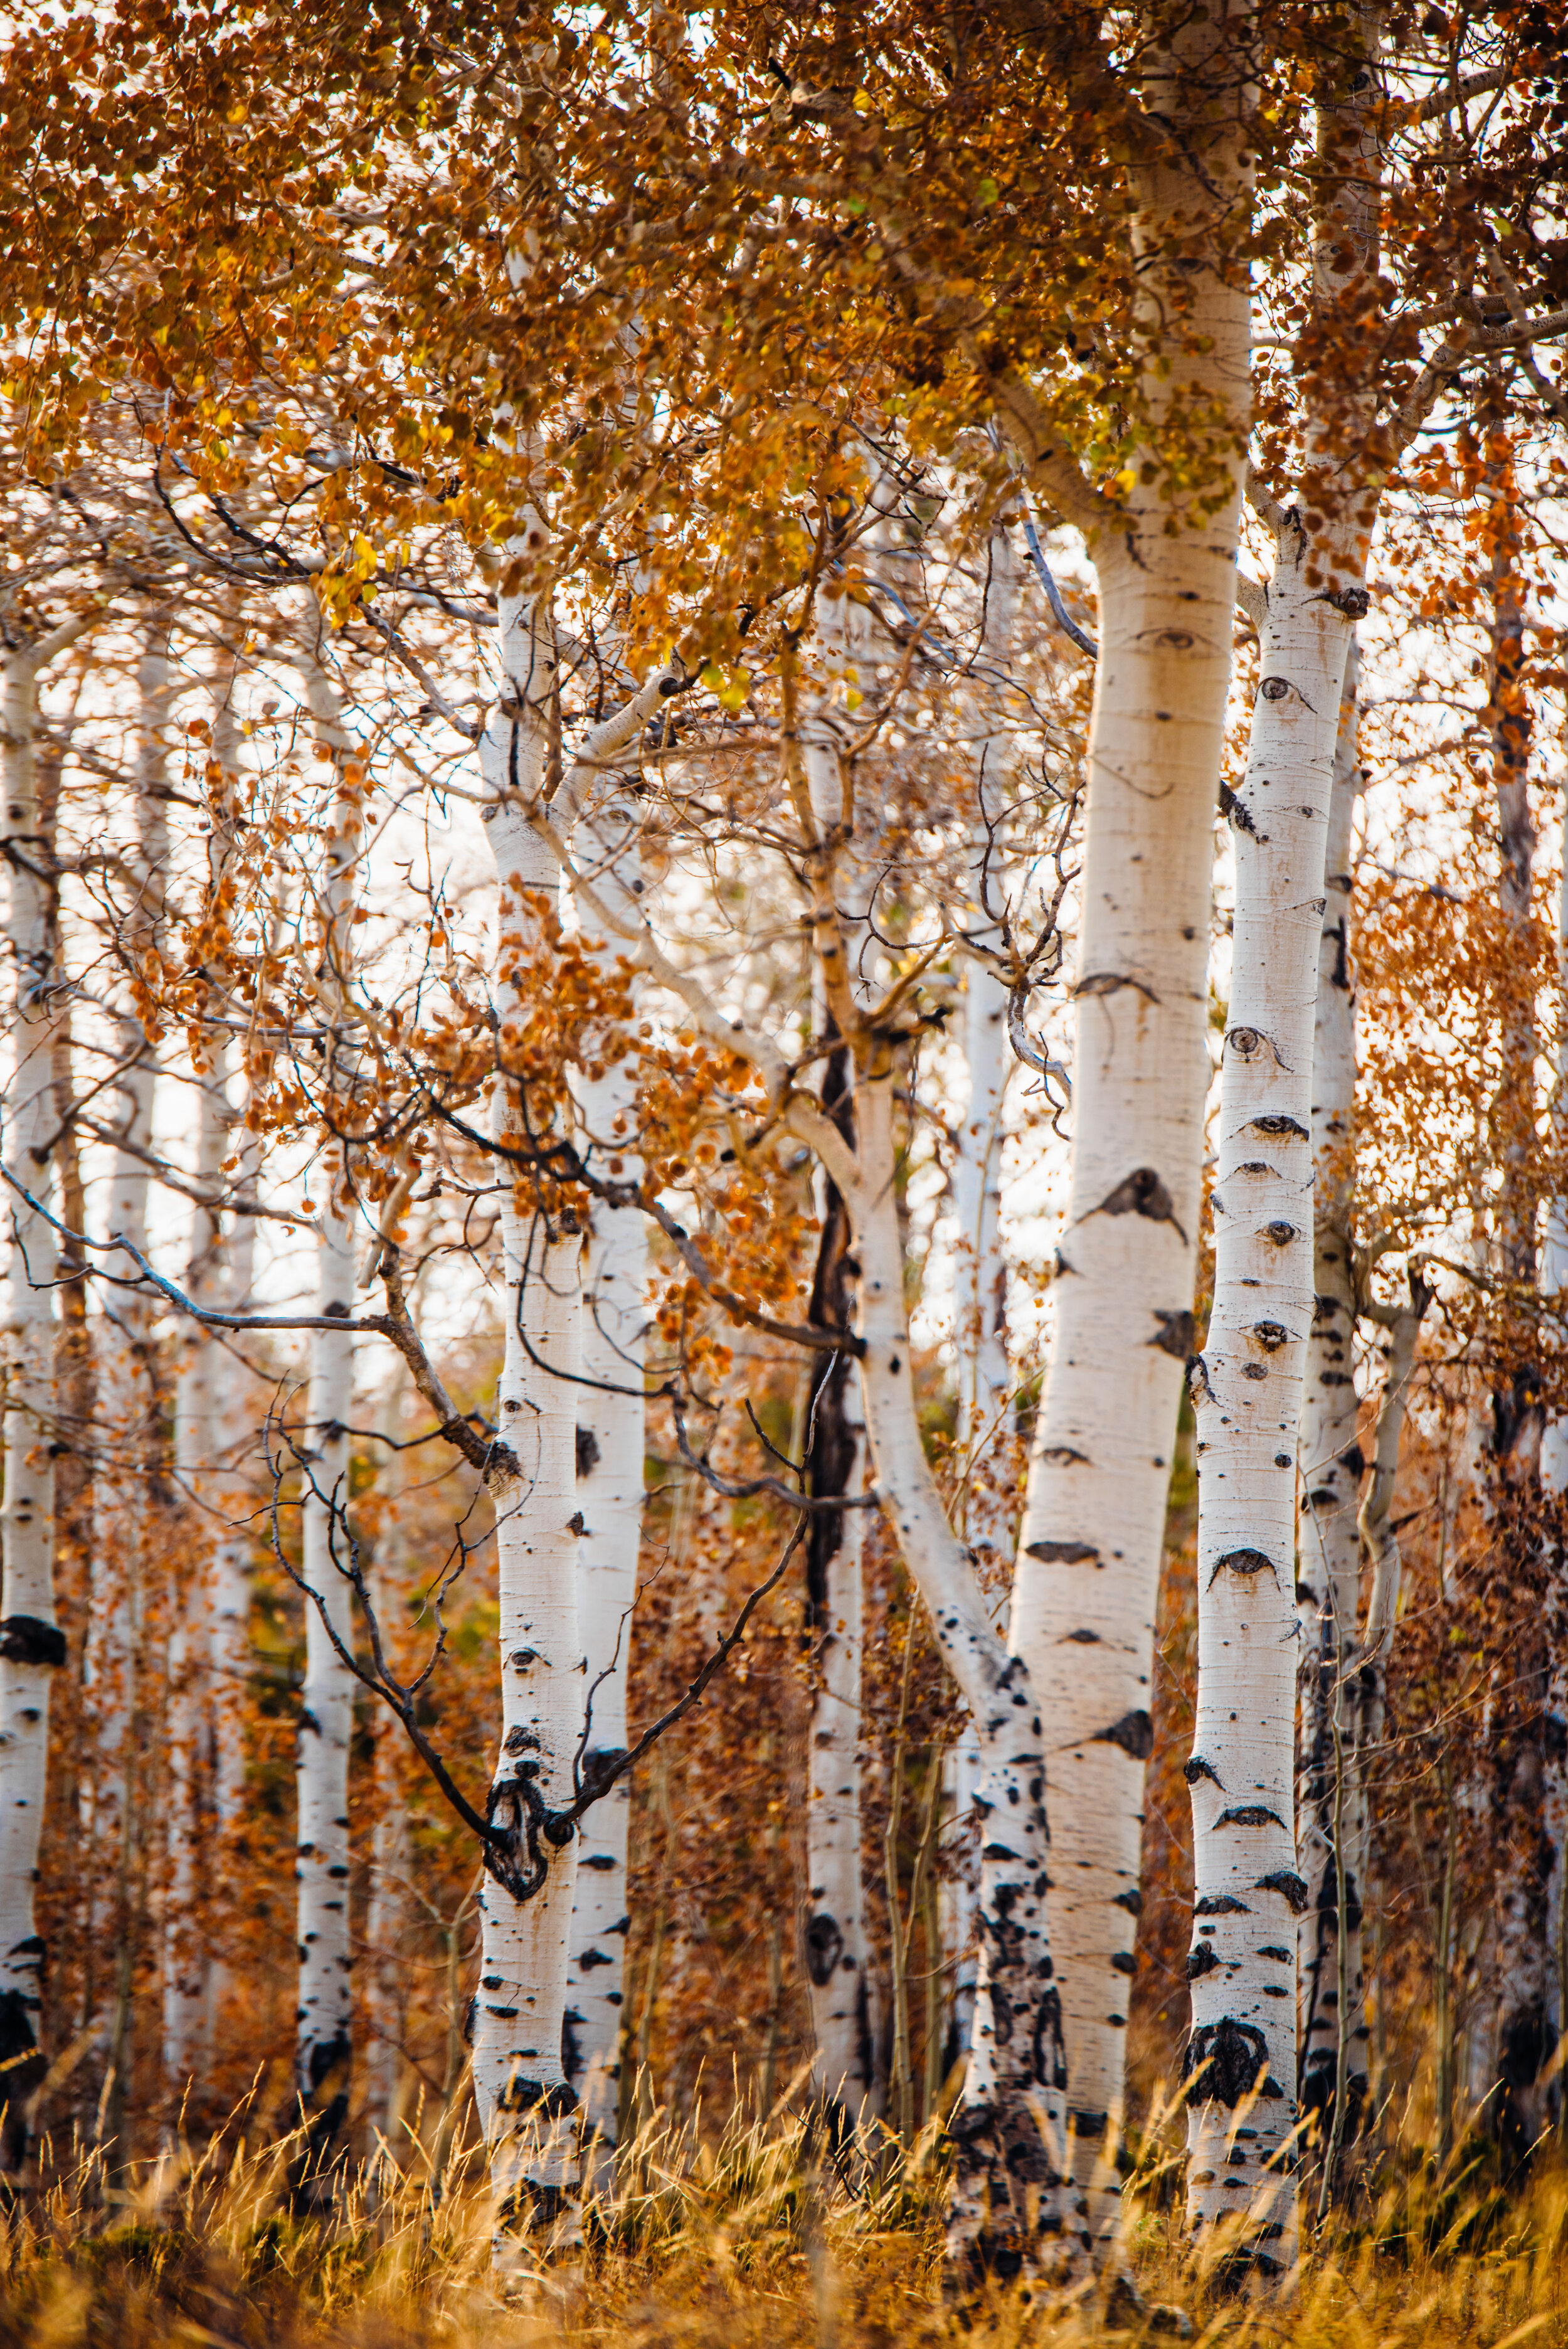 Nothing better than aspen in the fall.